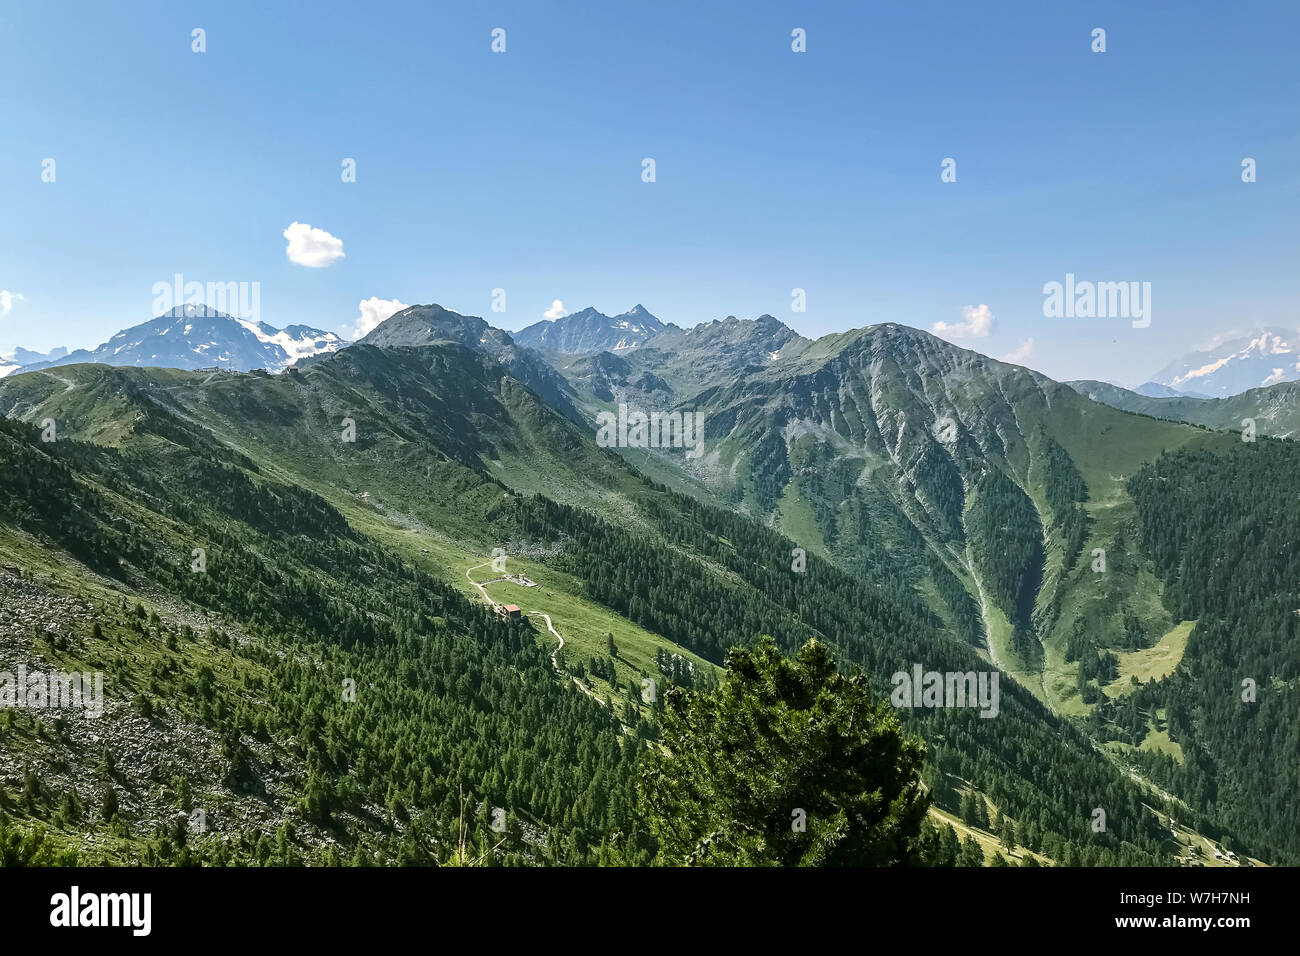 The wooded slopes of the Alpine mountains in Switzerland against a blue sky with a winding path in the distance. Stock Photo